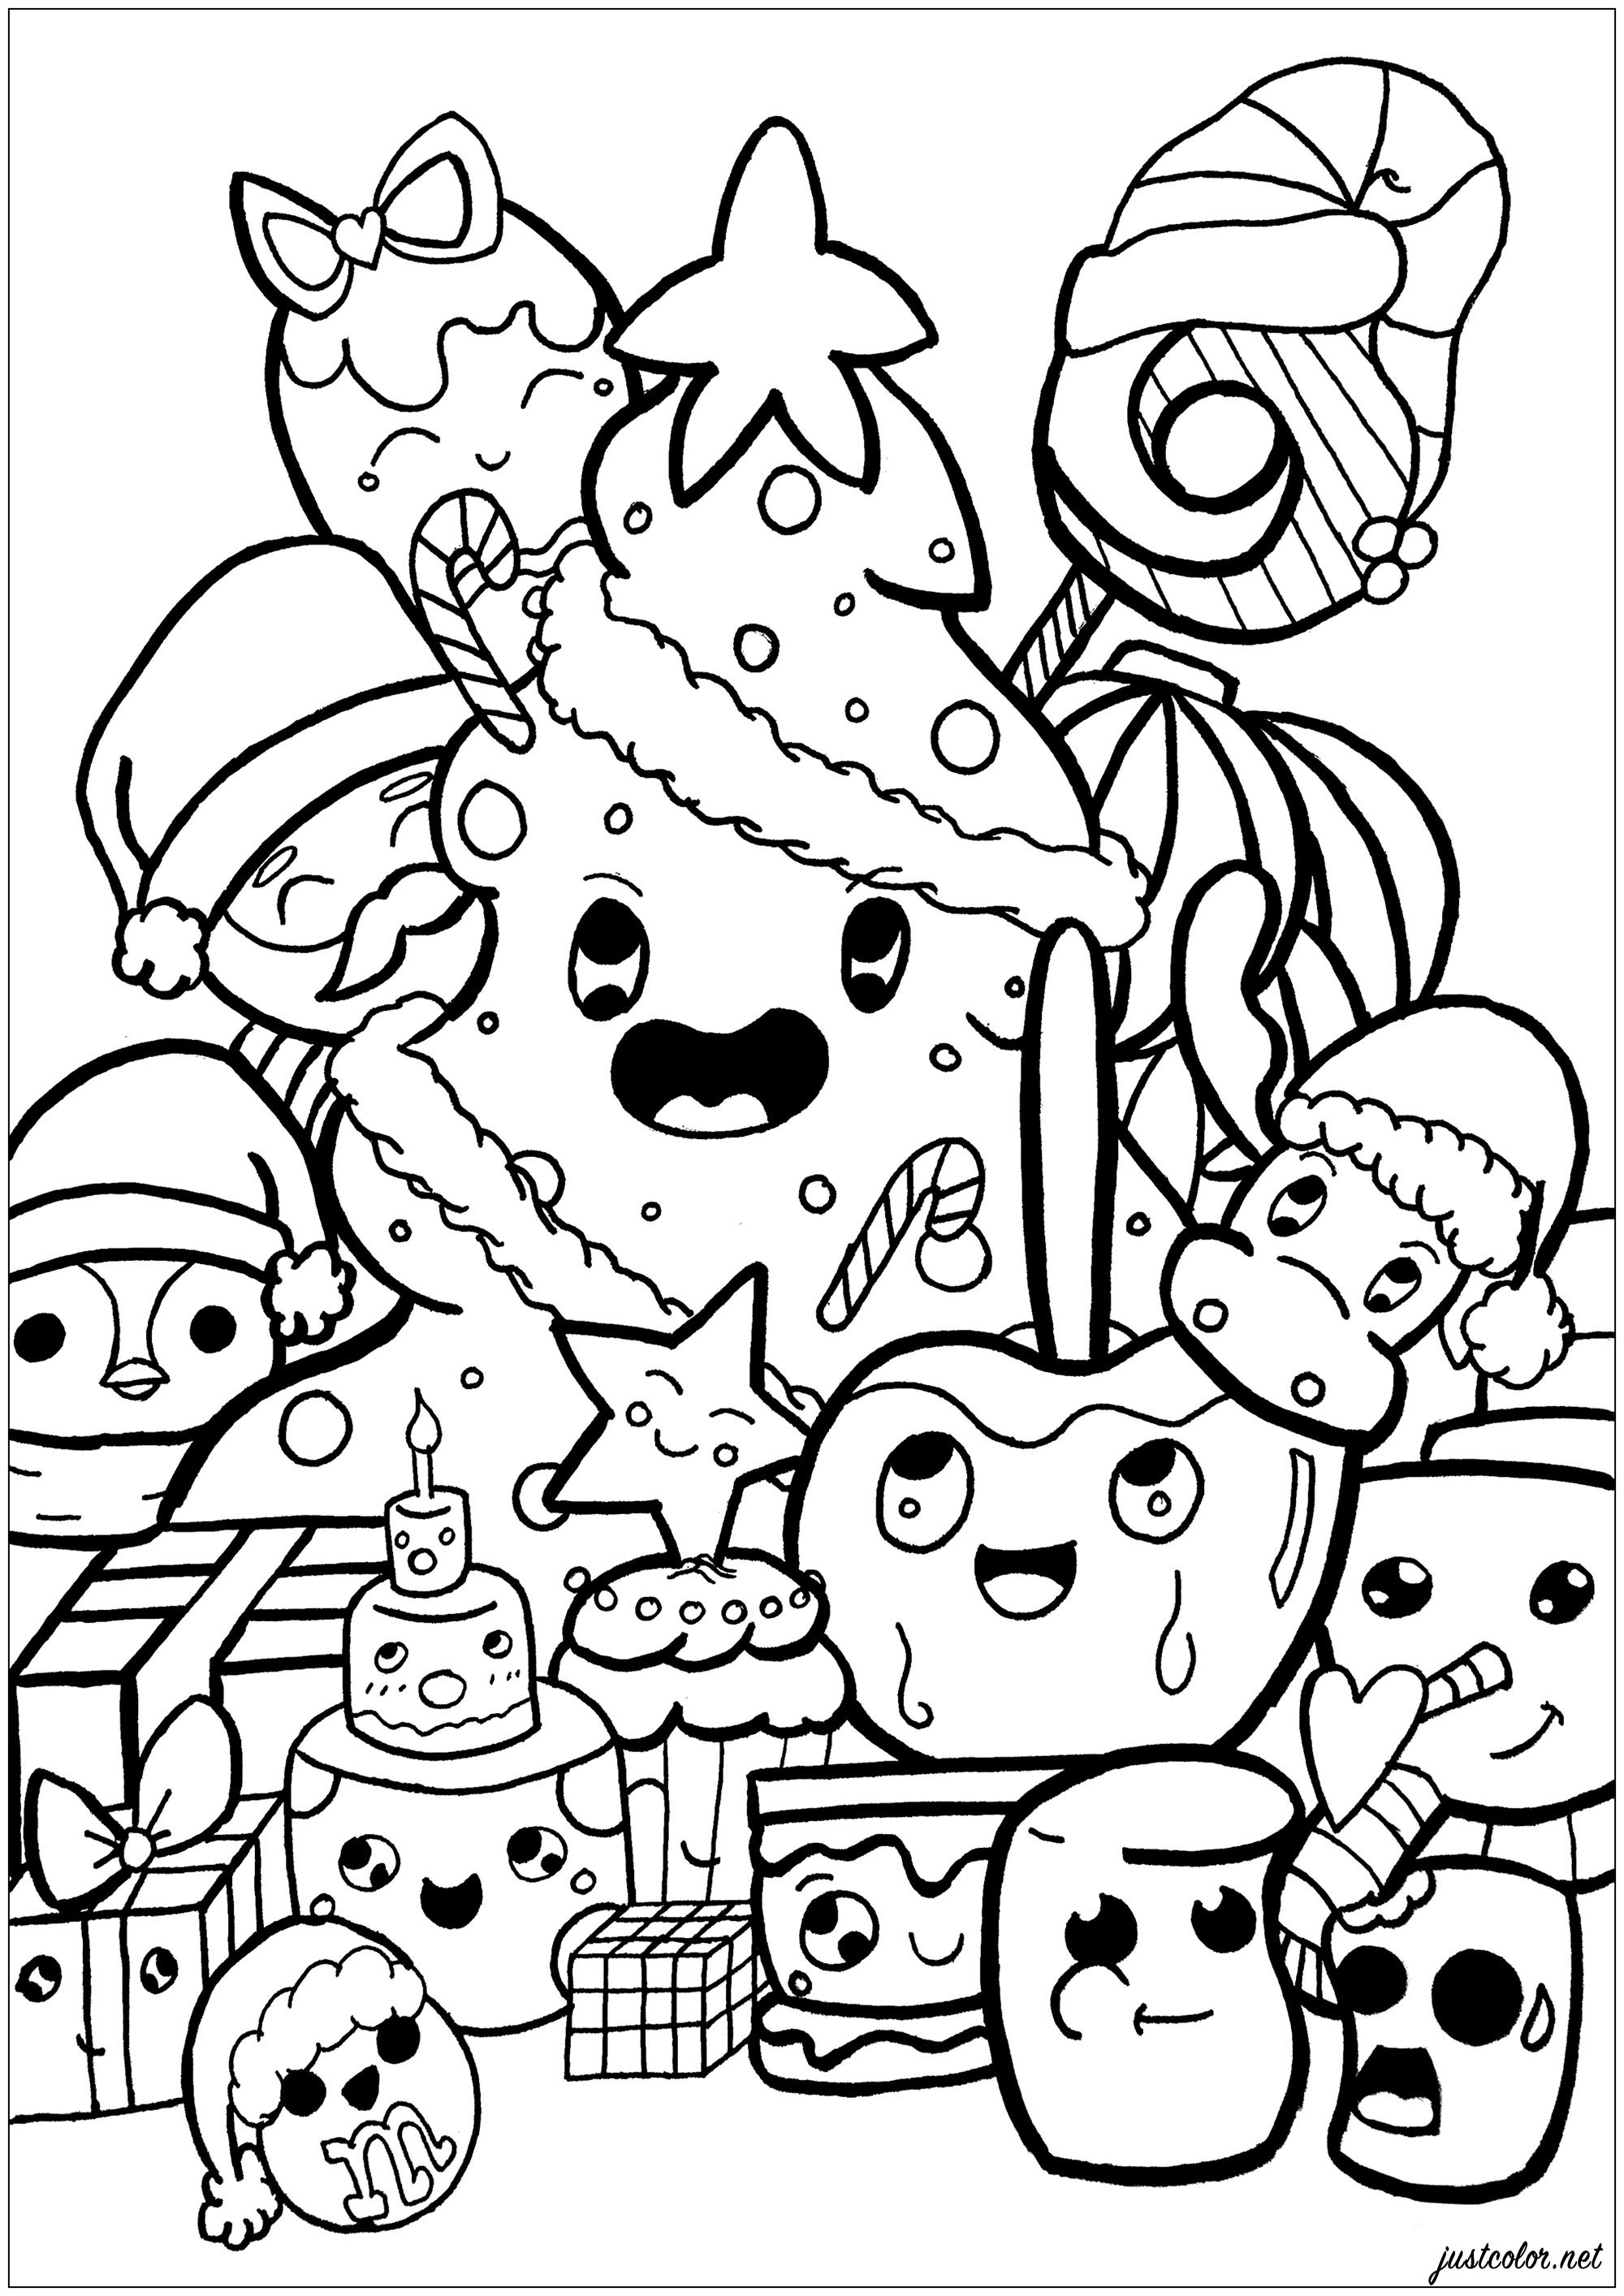 Download Christmas Doodle - Doodle Art / Doodling Adult Coloring Pages